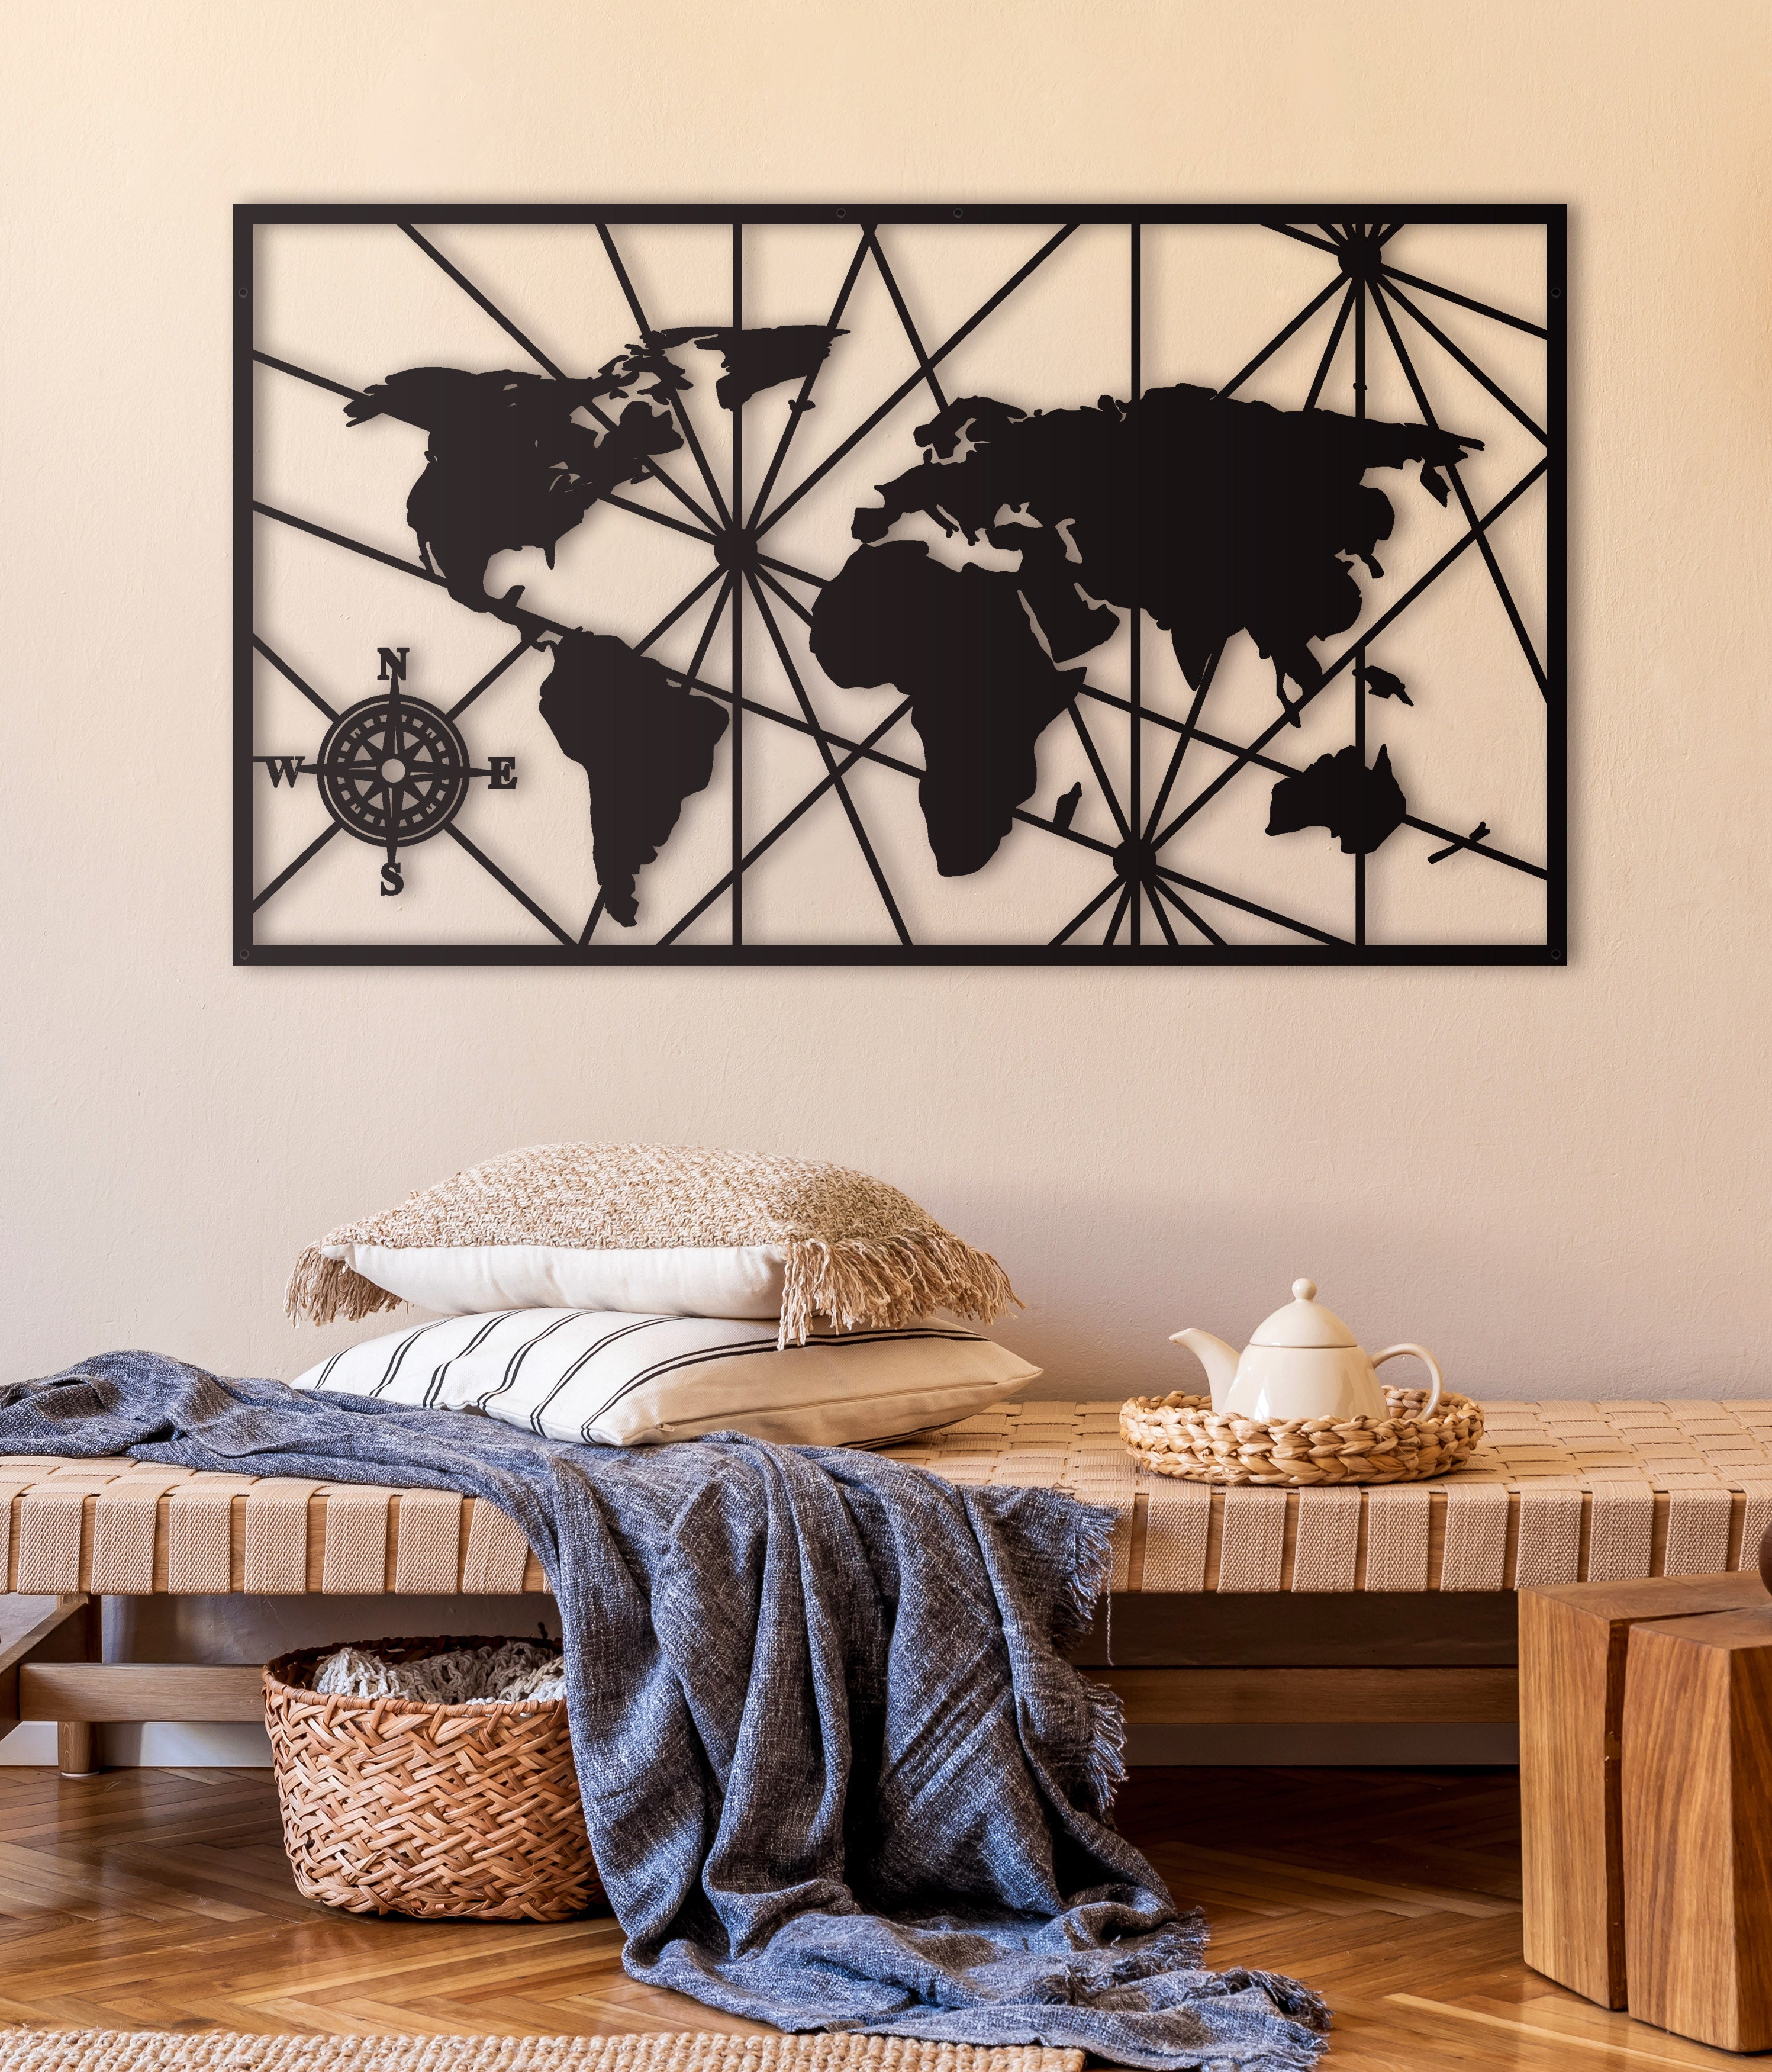 Compass World Map Large Metal Wall Decor/Industrial Office Wall Hanging Art/Home Interior Decoration Housewarming Gift Metal Sign Decor